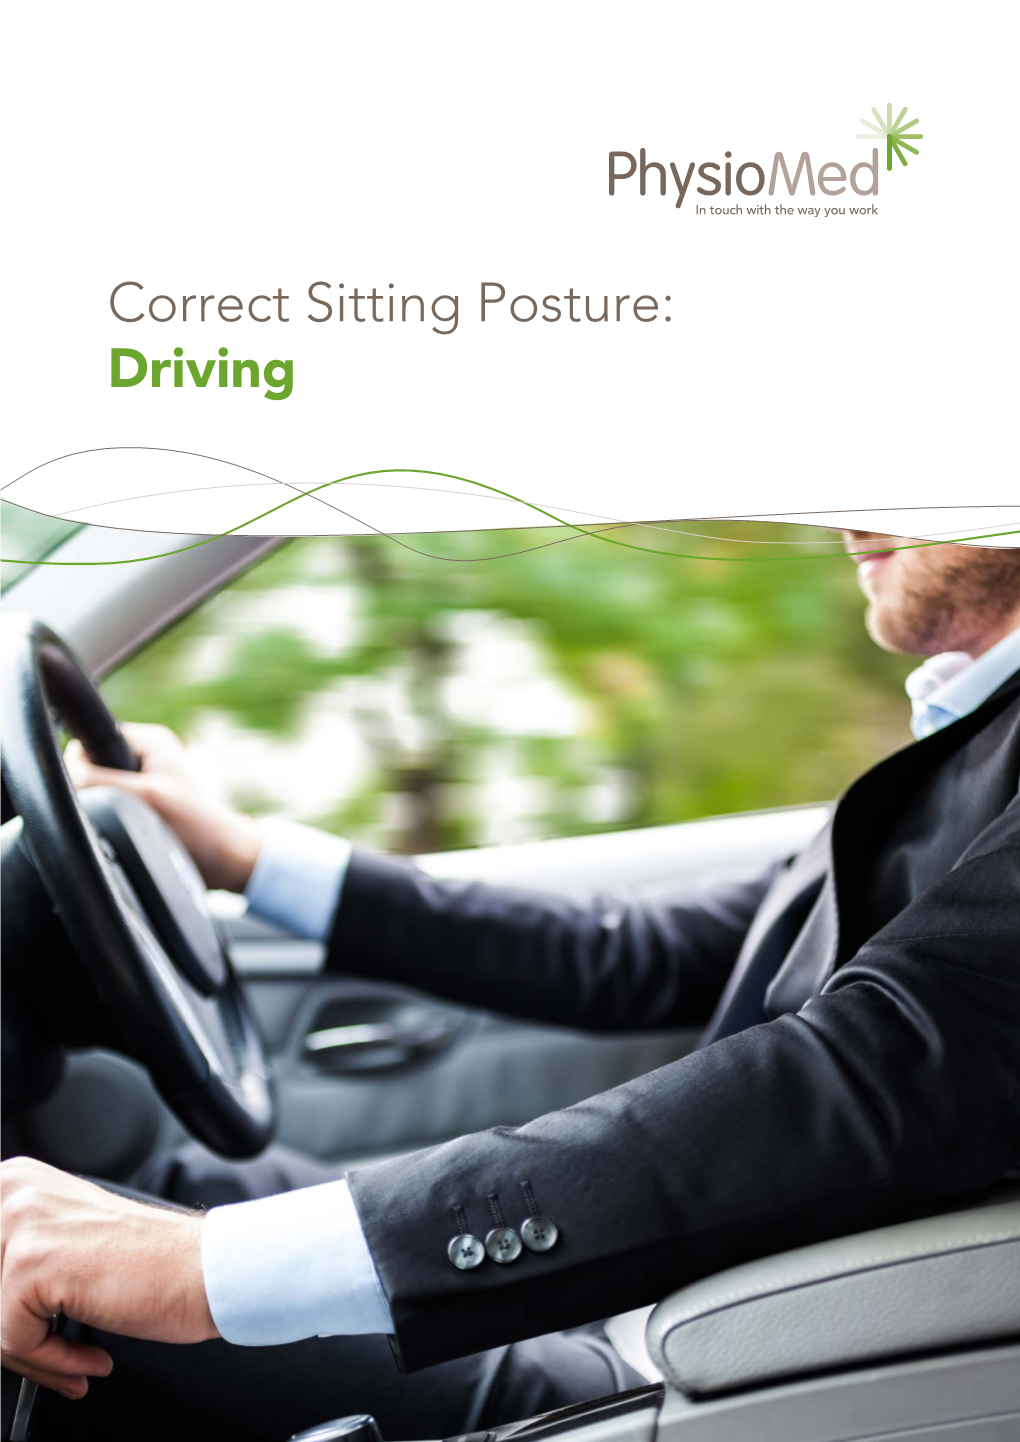 Correct Sitting Posture: Driving Physio Med